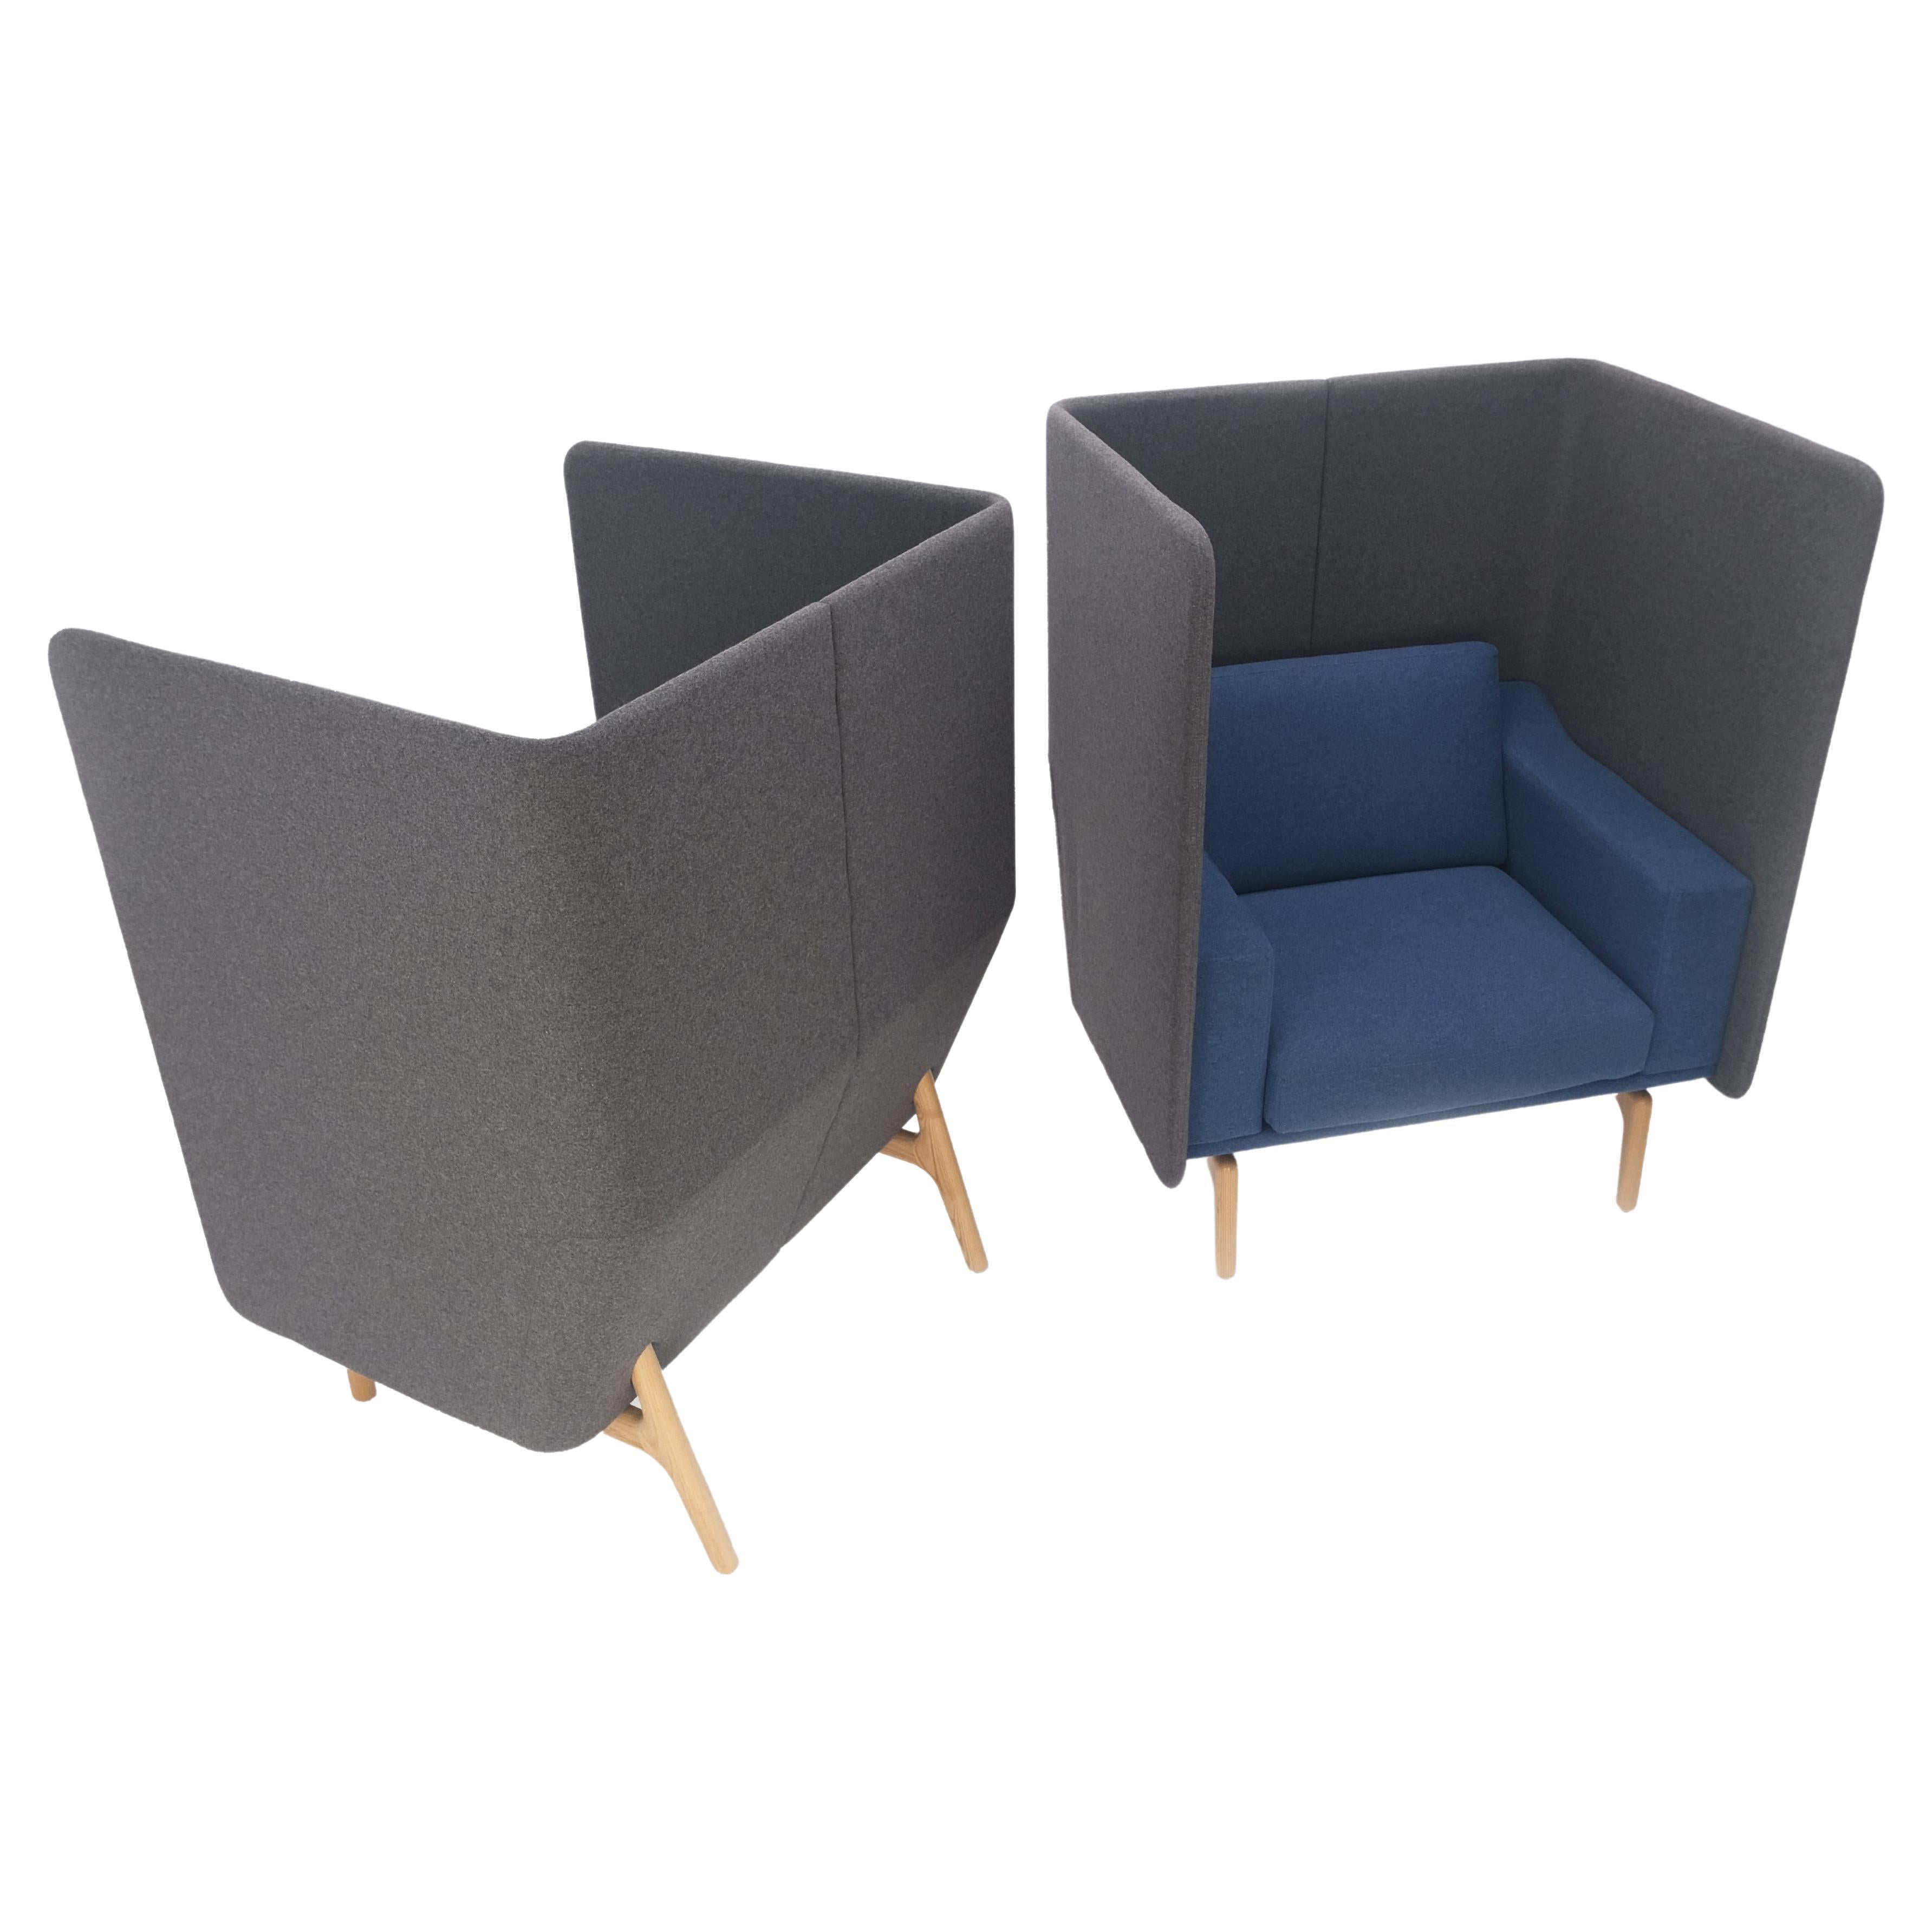 Pair Mid Century Modern Wingback Lounge Chairs Blue Grey Wool Upholstery MINT! For Sale